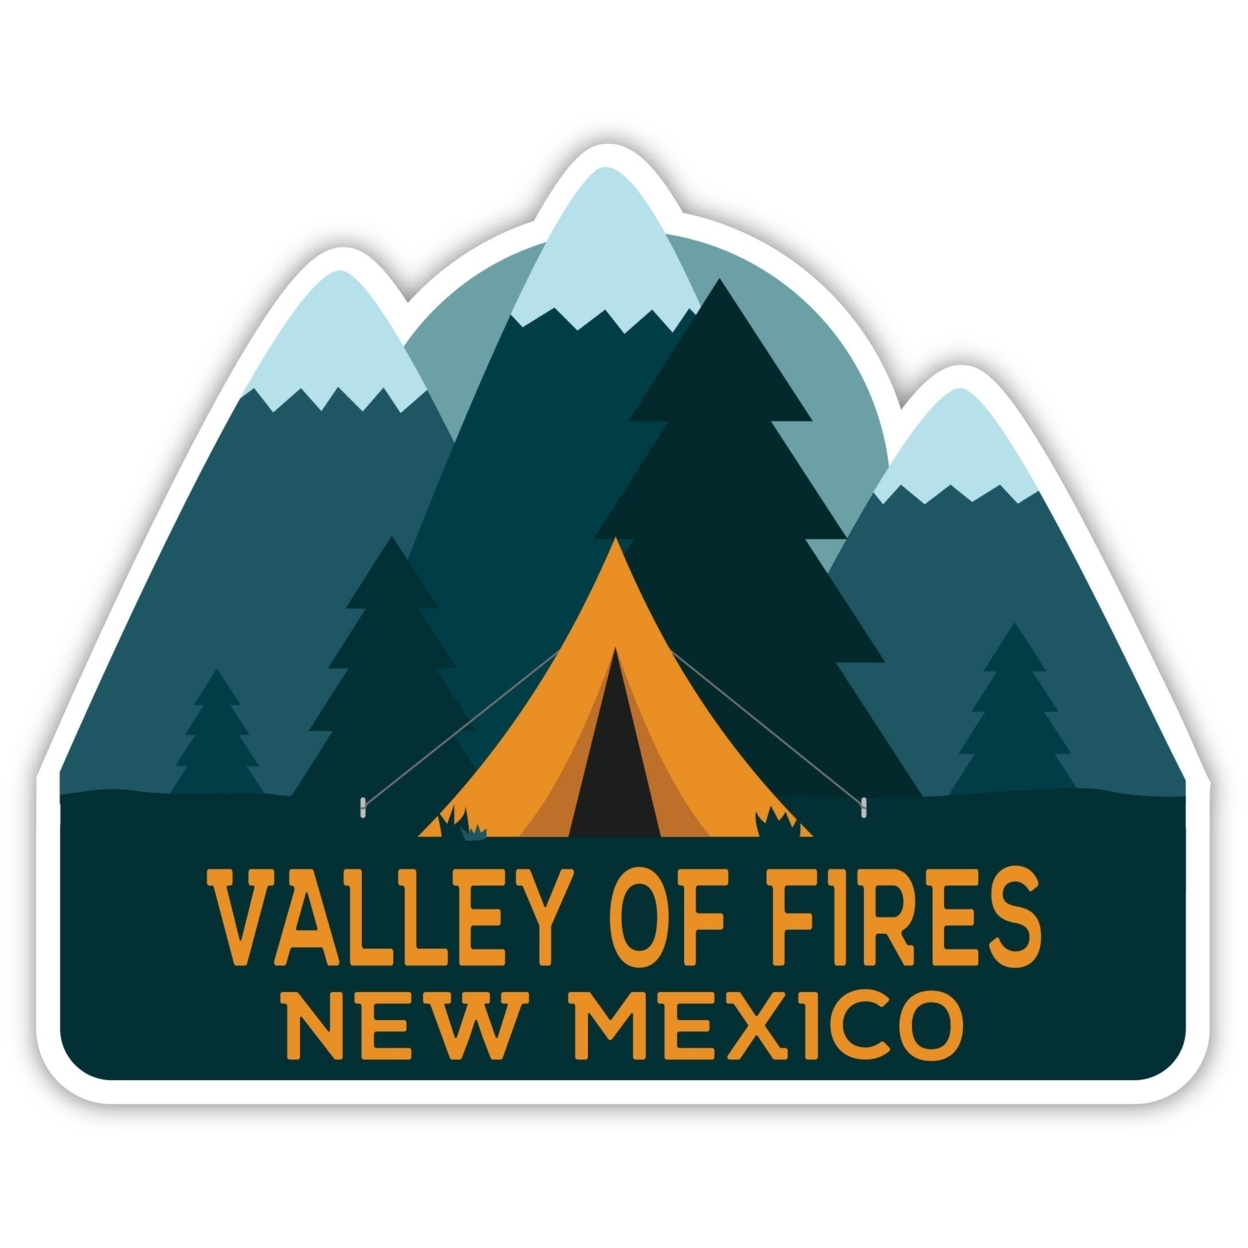 Valley Of Fires New Mexico Souvenir Decorative Stickers (Choose Theme And Size) - Single Unit, 4-Inch, Tent